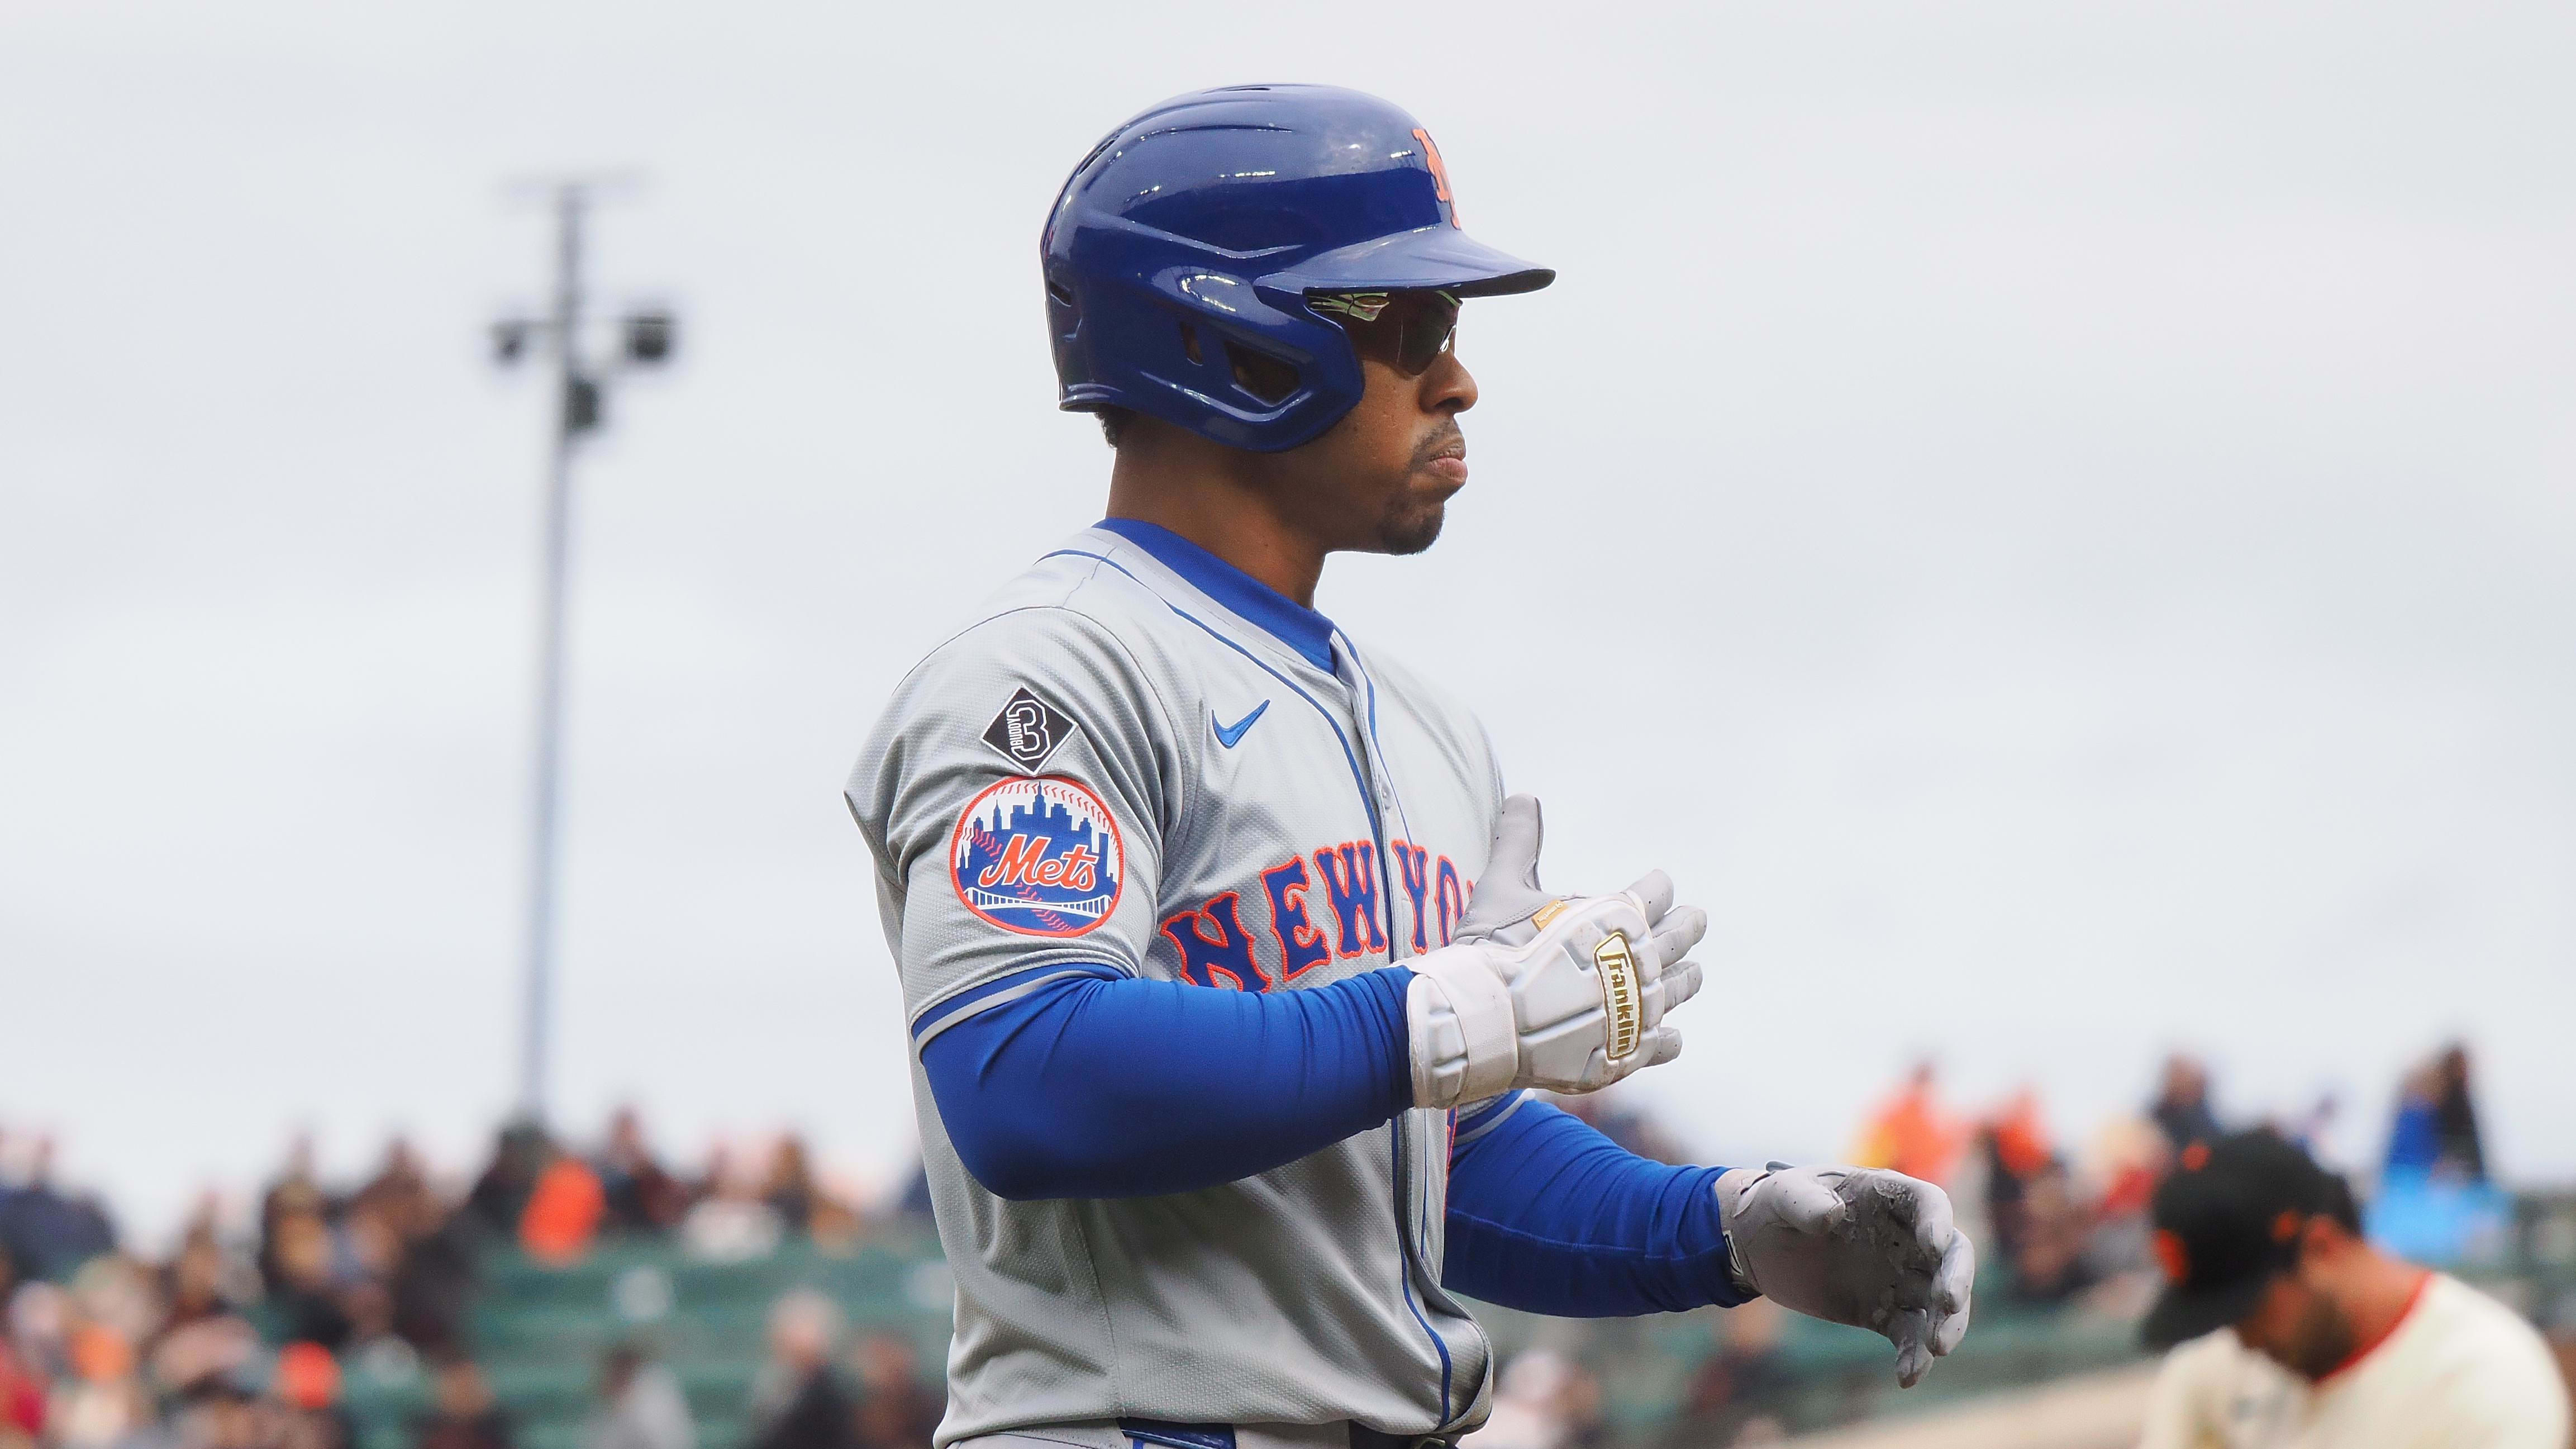 New York Mets shortstop Francisco Lindor hit two home runs against the San Francisco Giants in Wednesday's action